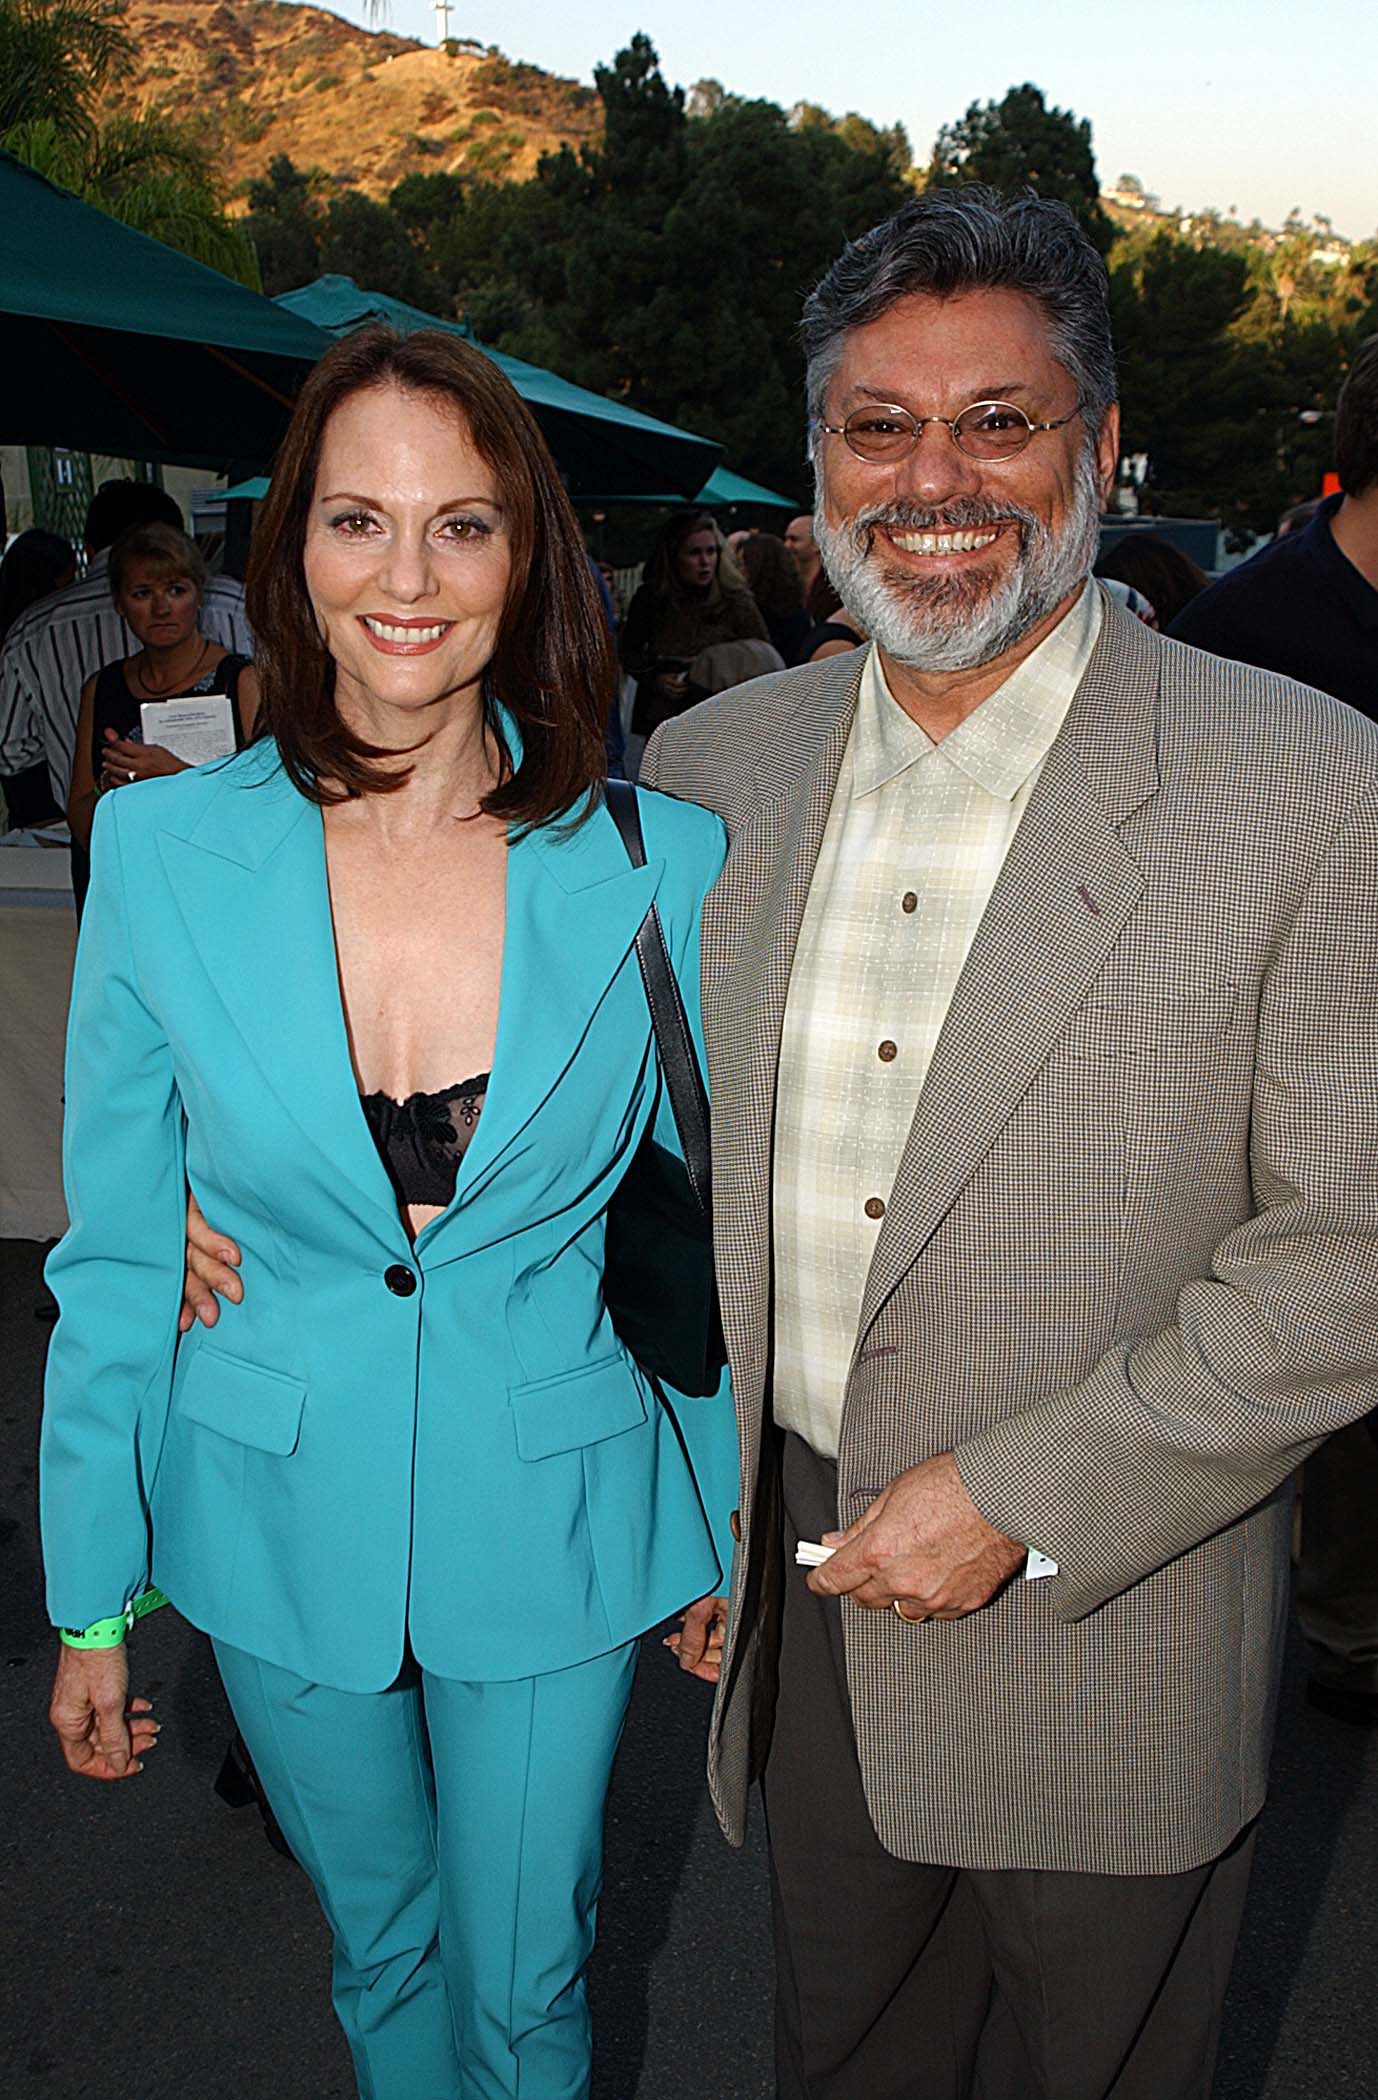 Lesley Ann Warren and Ron Taft at the "Band of Brothers" premiere in Hollywood, 2001 | Source: Getty Images